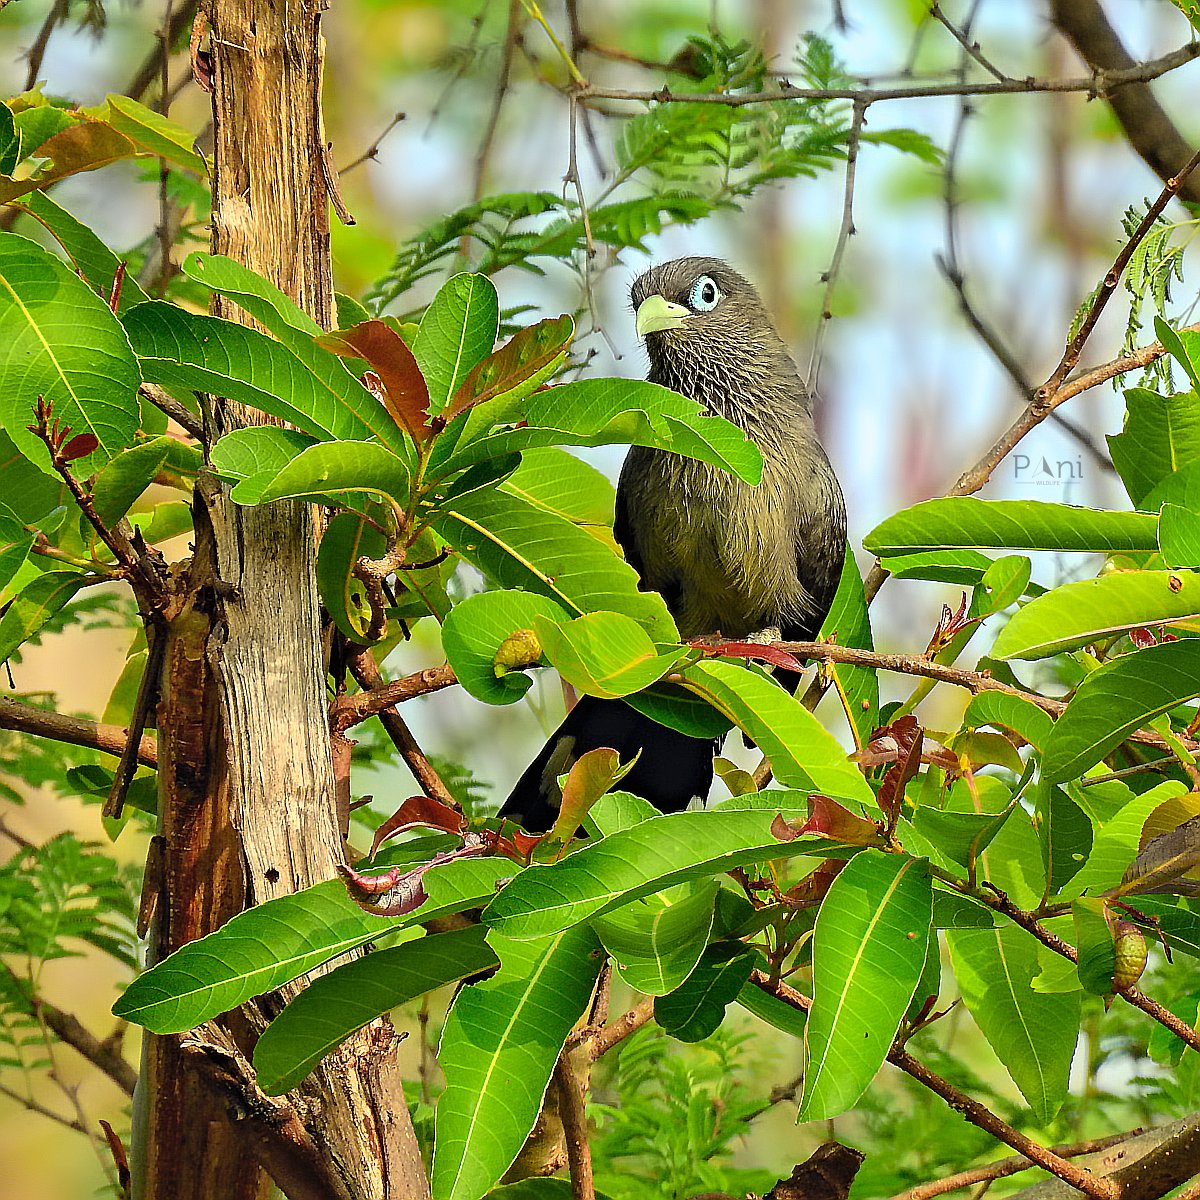 Blue Faced Malkoha

It has a waxy, dark blue-grey plumage on its upperparts, a long tail with graduated white-tipped feathers, and a bright red iris surrounded by a large blue eye patch.

@IndiAves  @Avibase

#bluefacedmalkoha #malkoha #birdphotography #birdsofindia